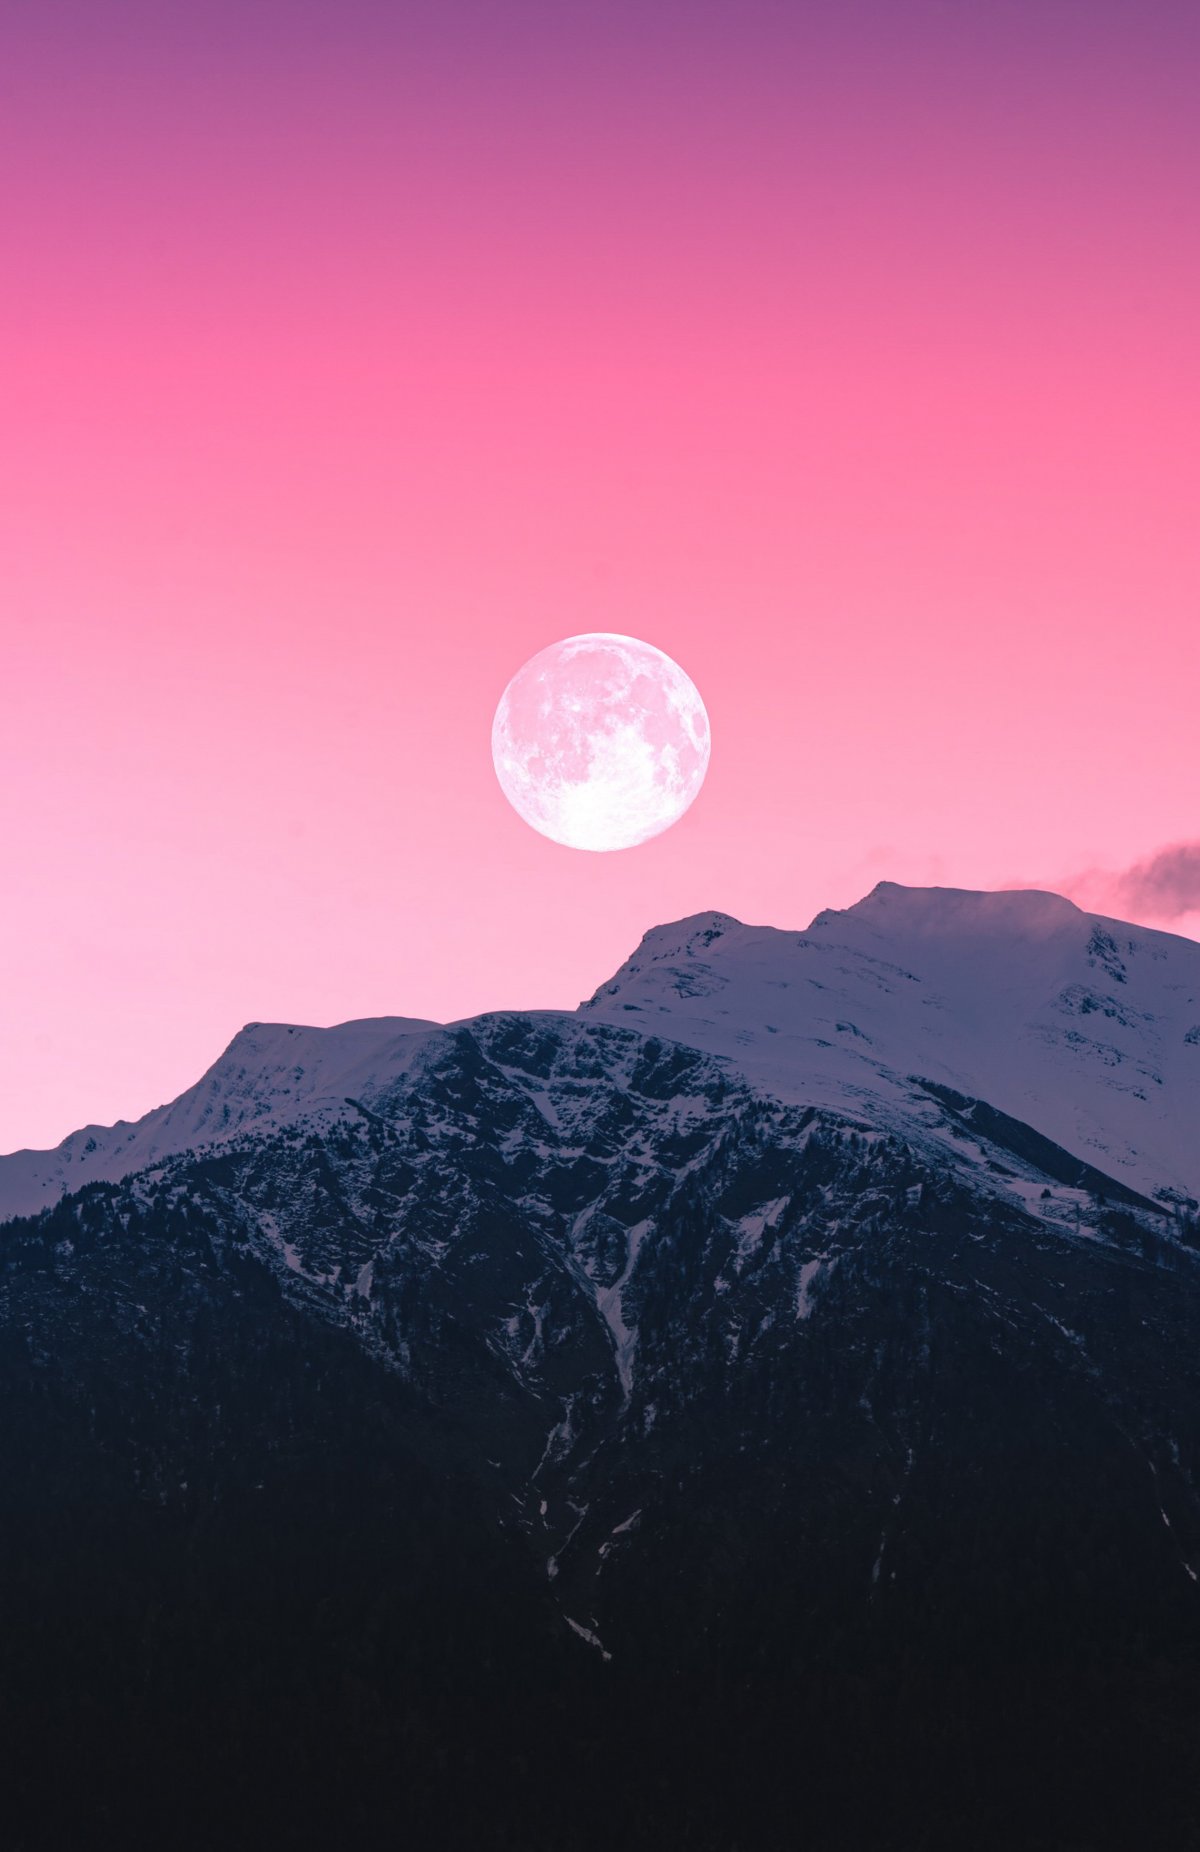 Full moon rising over mountains pictures